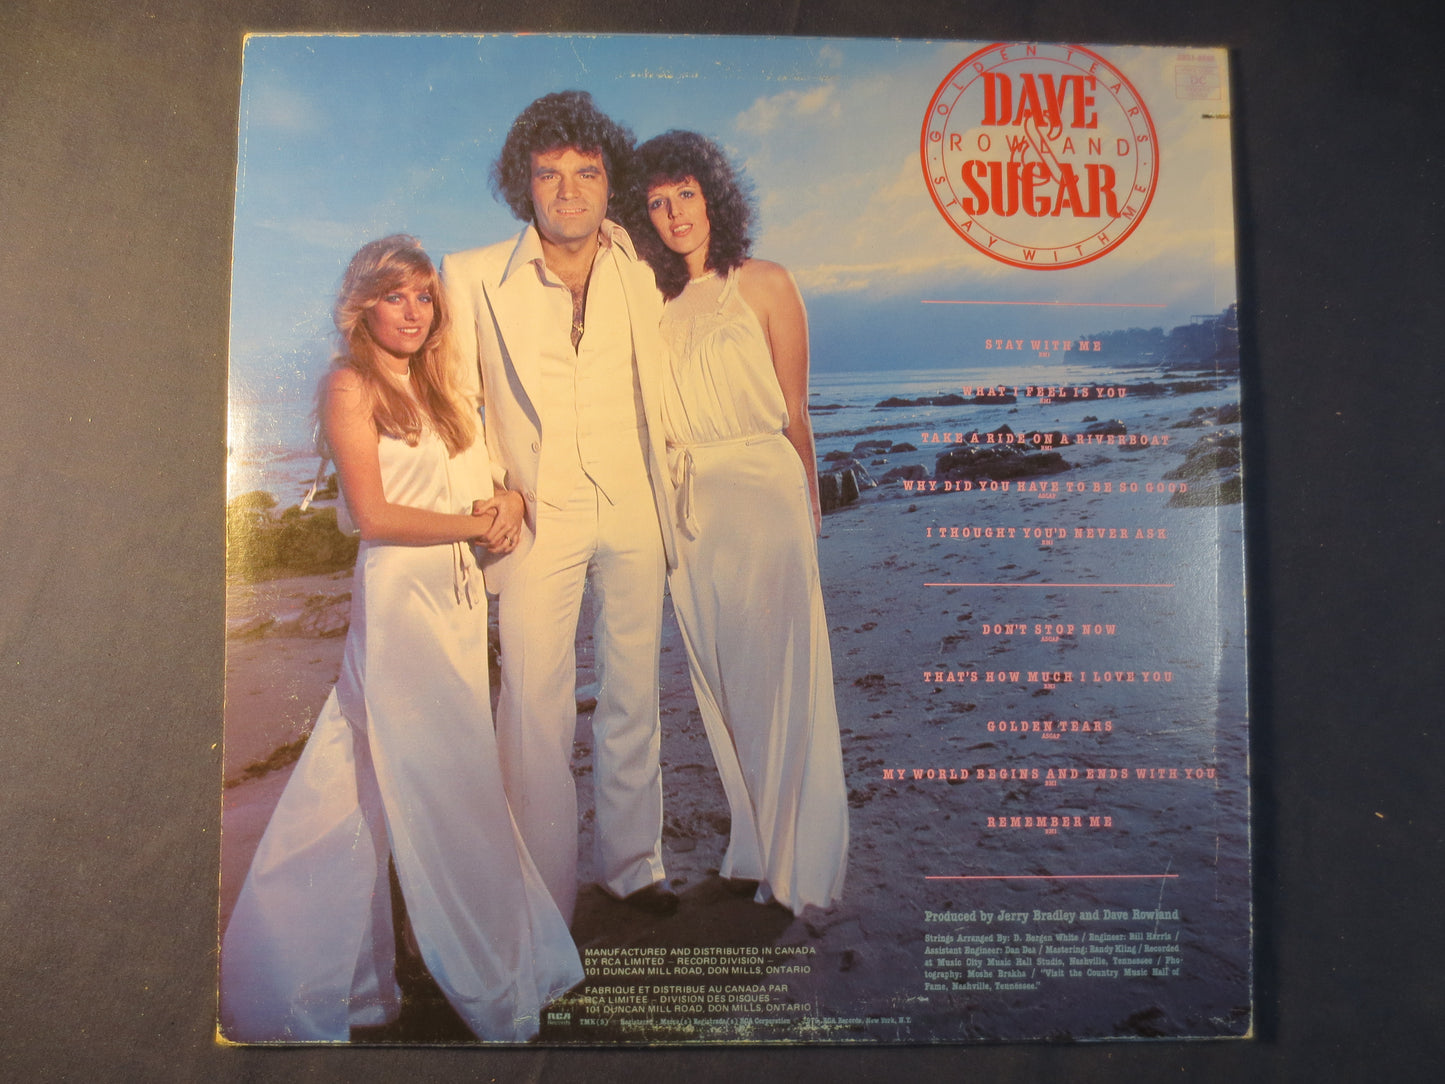 DAVE and SUGAR, Dave ROWLANDS, Golden Tears Stay With Me, Country Records, Vintage Vinyl, Vinyl Records, Lps, 1979 Records